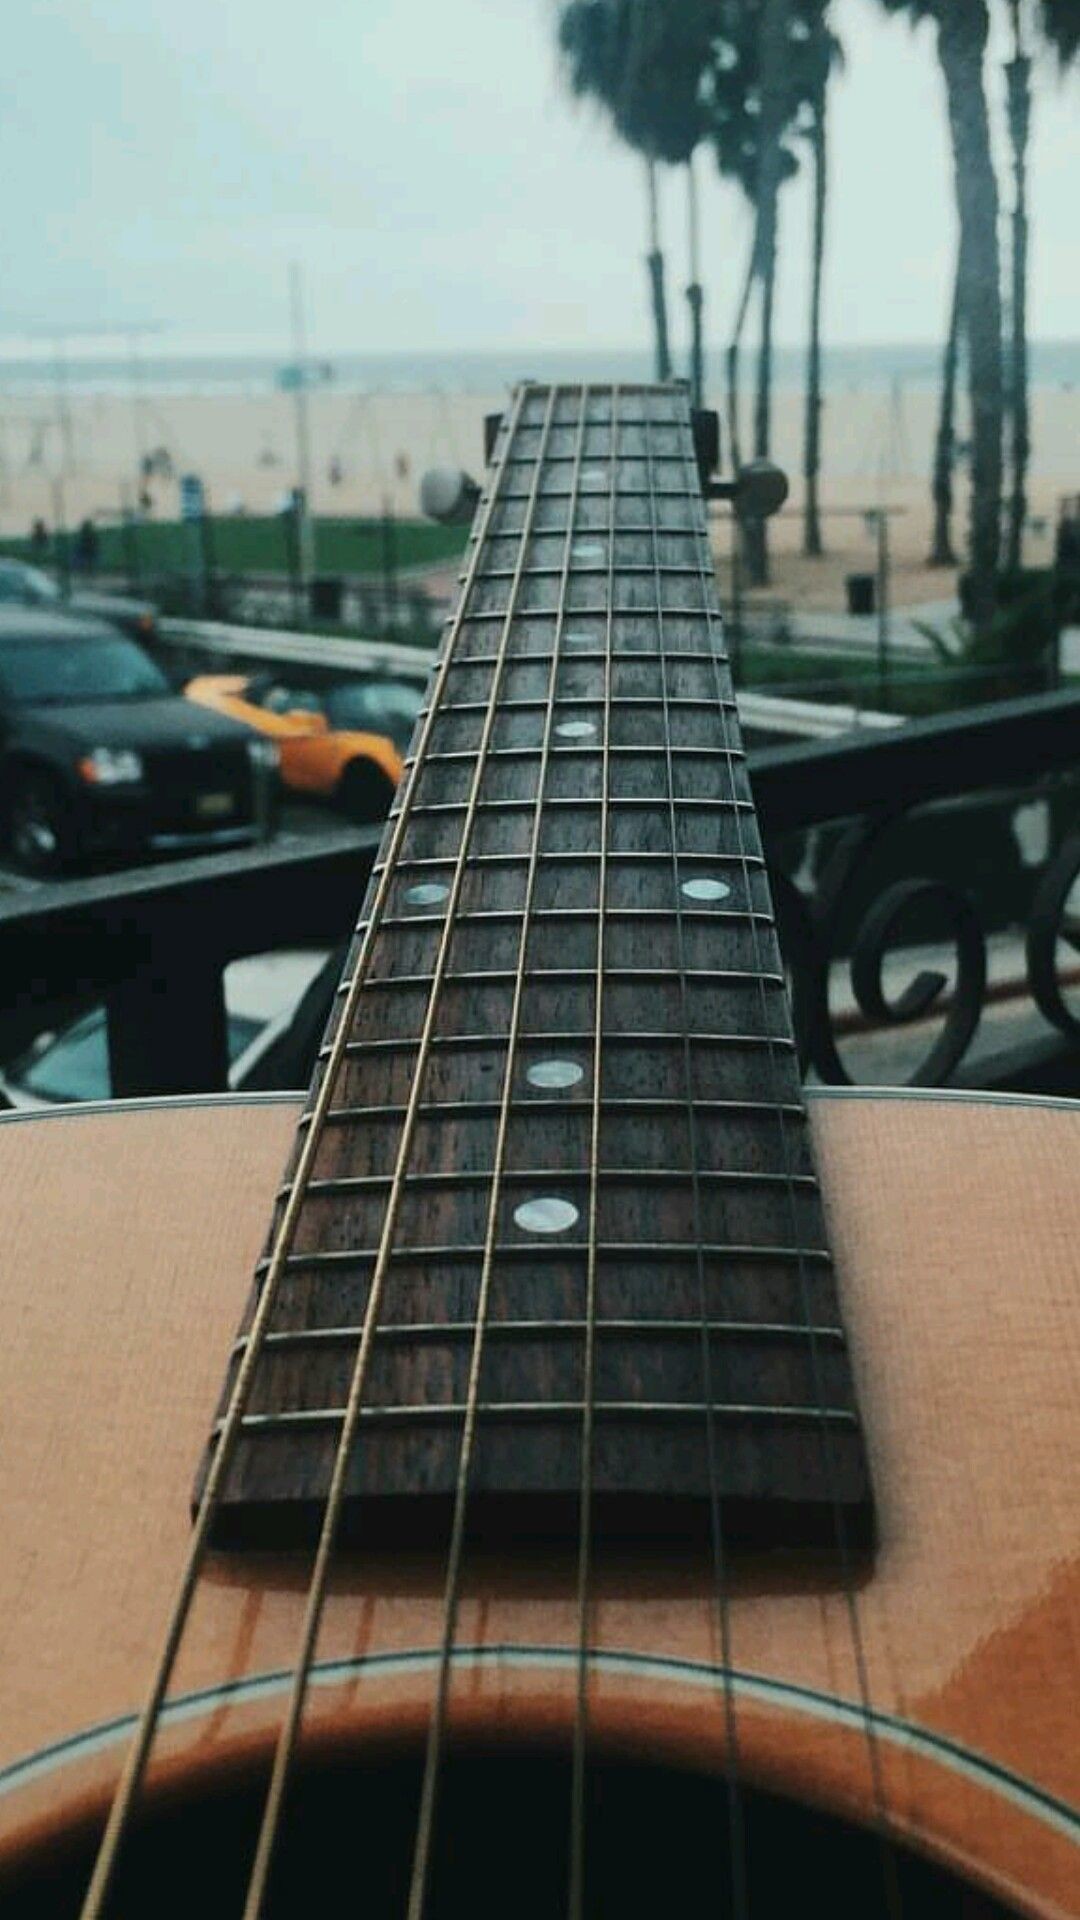 1080x1920 Guitar wallpaper from Alex Aiono post on Instagram